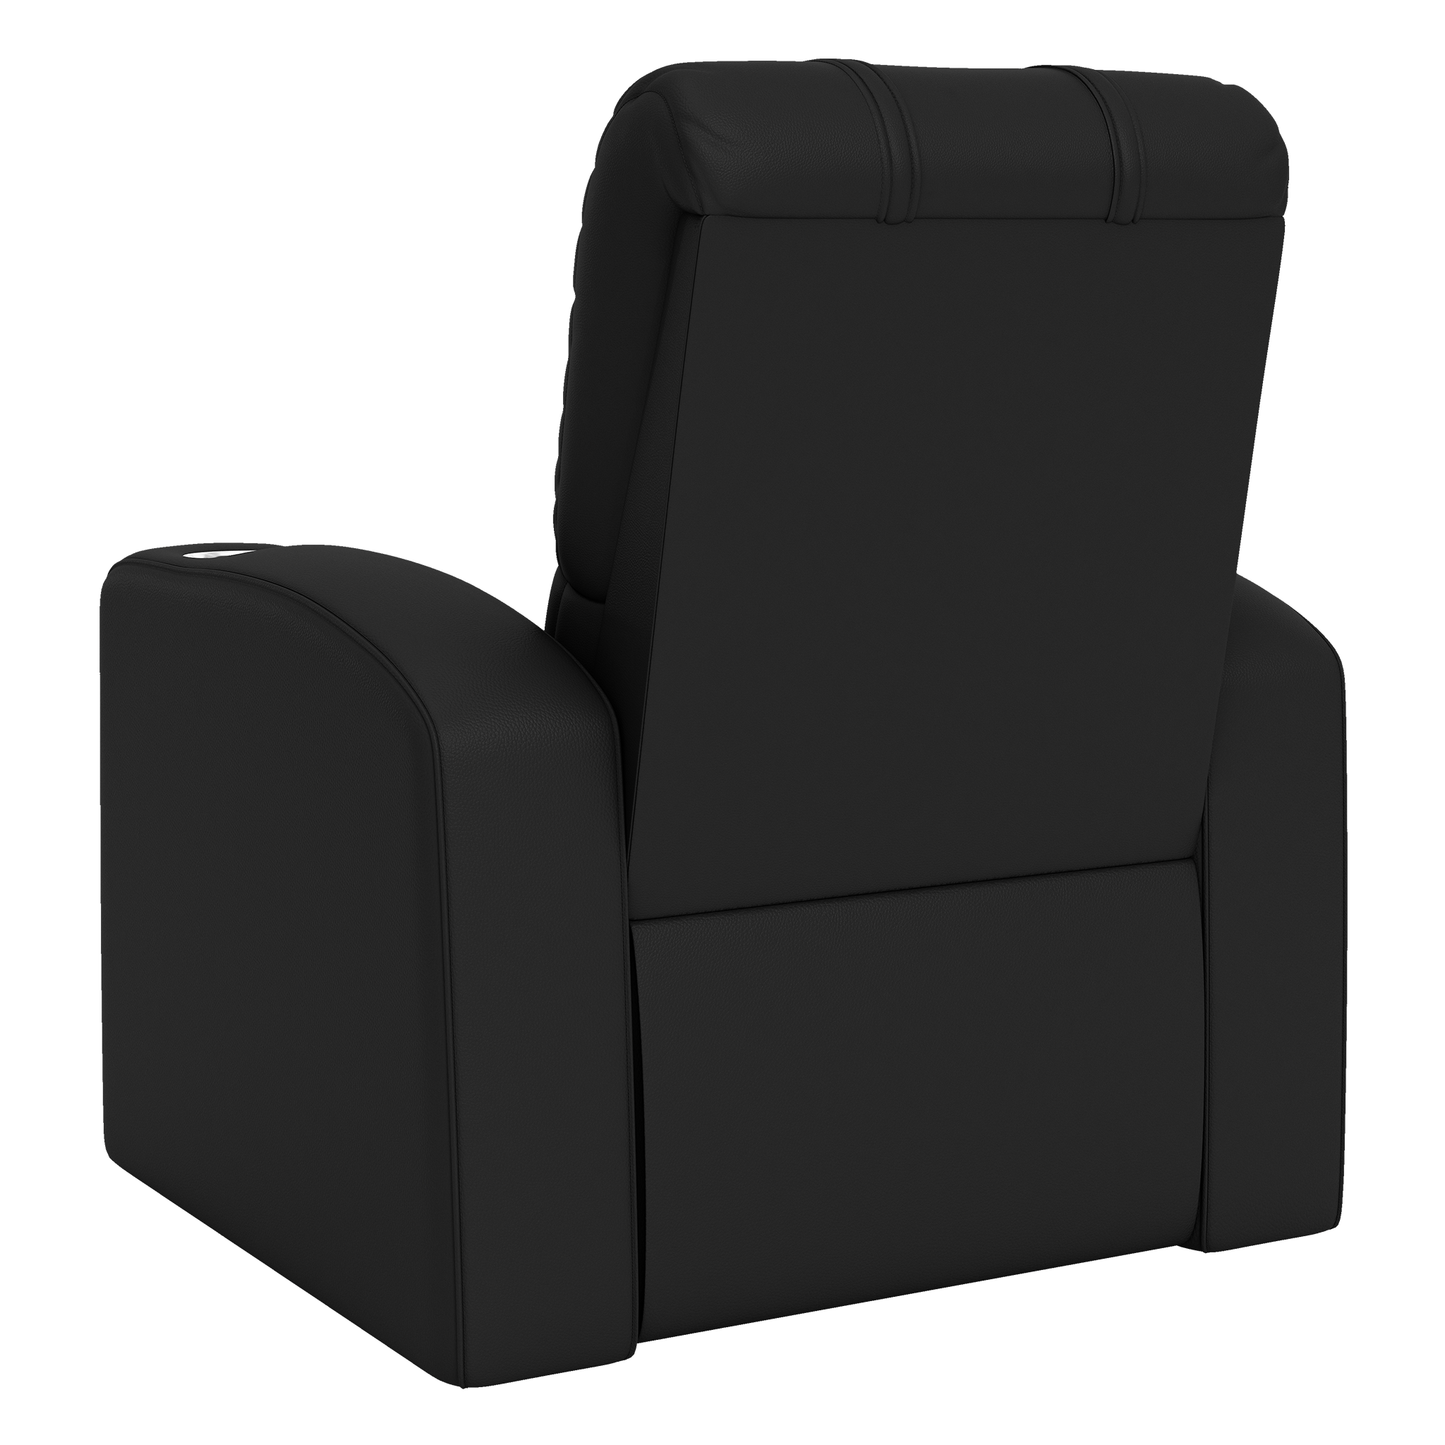 Relax Home Theater Recliner with Cleveland Cavaliers Primary Logo